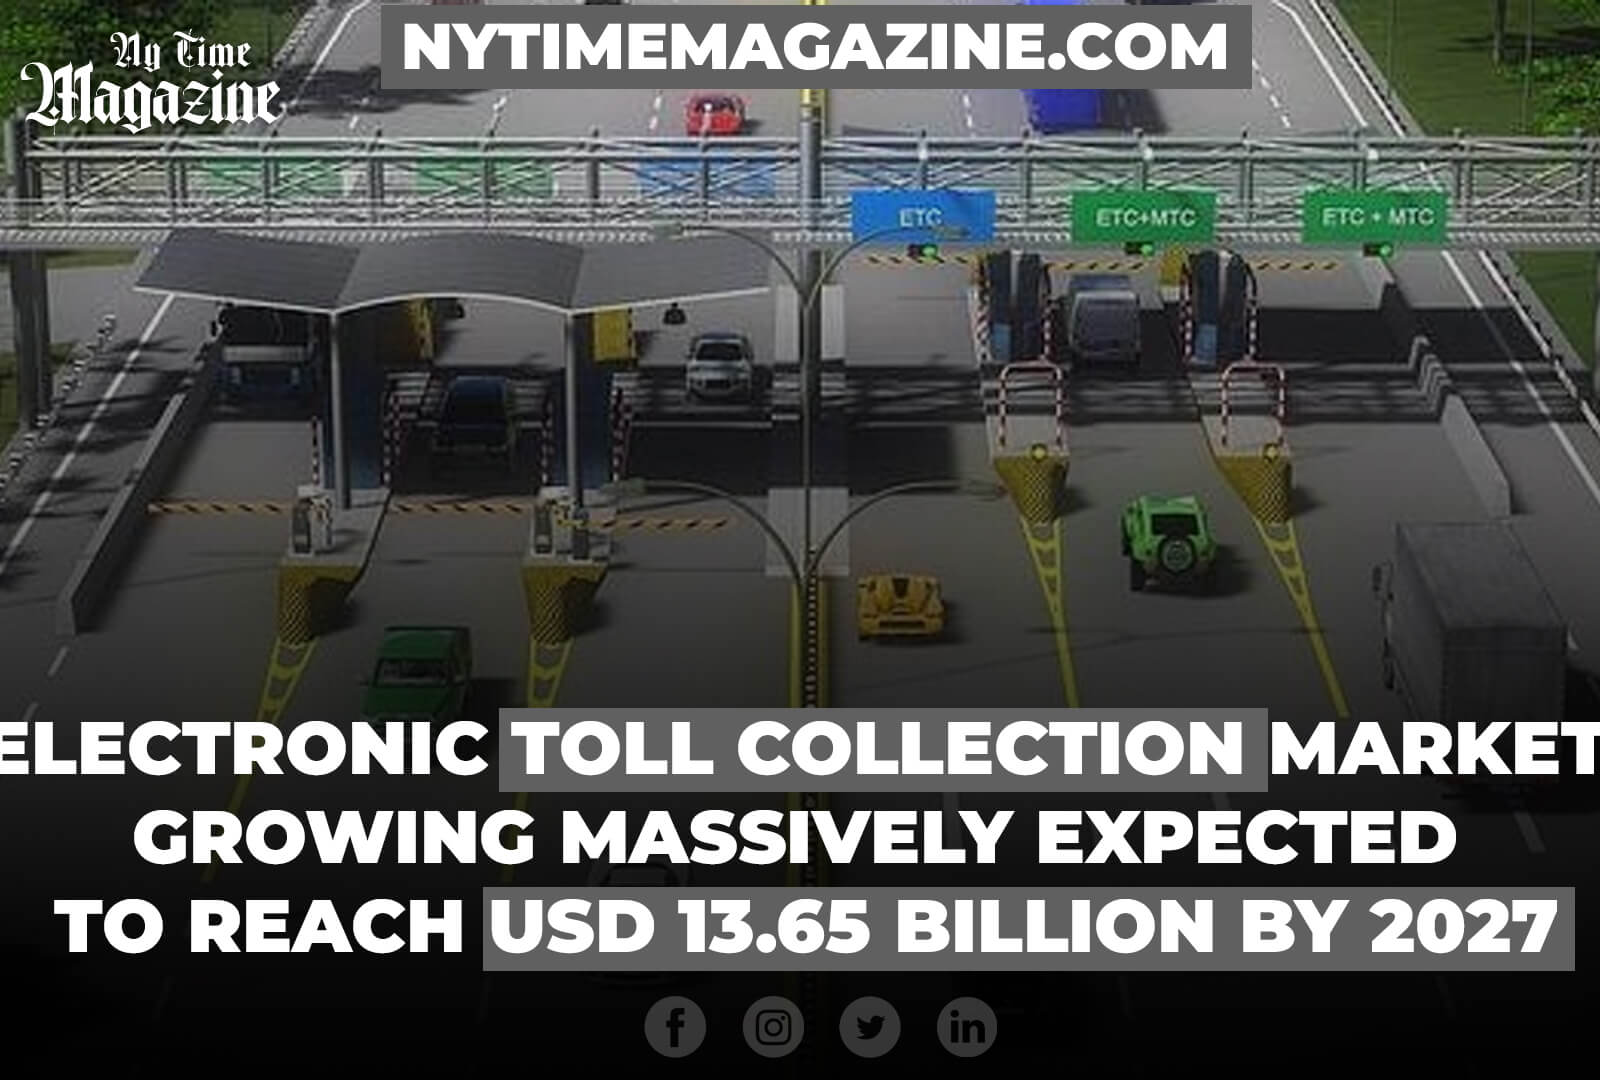 ELECTRONIC TOLL COLLECTION MARKET GROWING MASSIVELY EXPECTED TO REACH USD 13.65 BILLION BY 2027